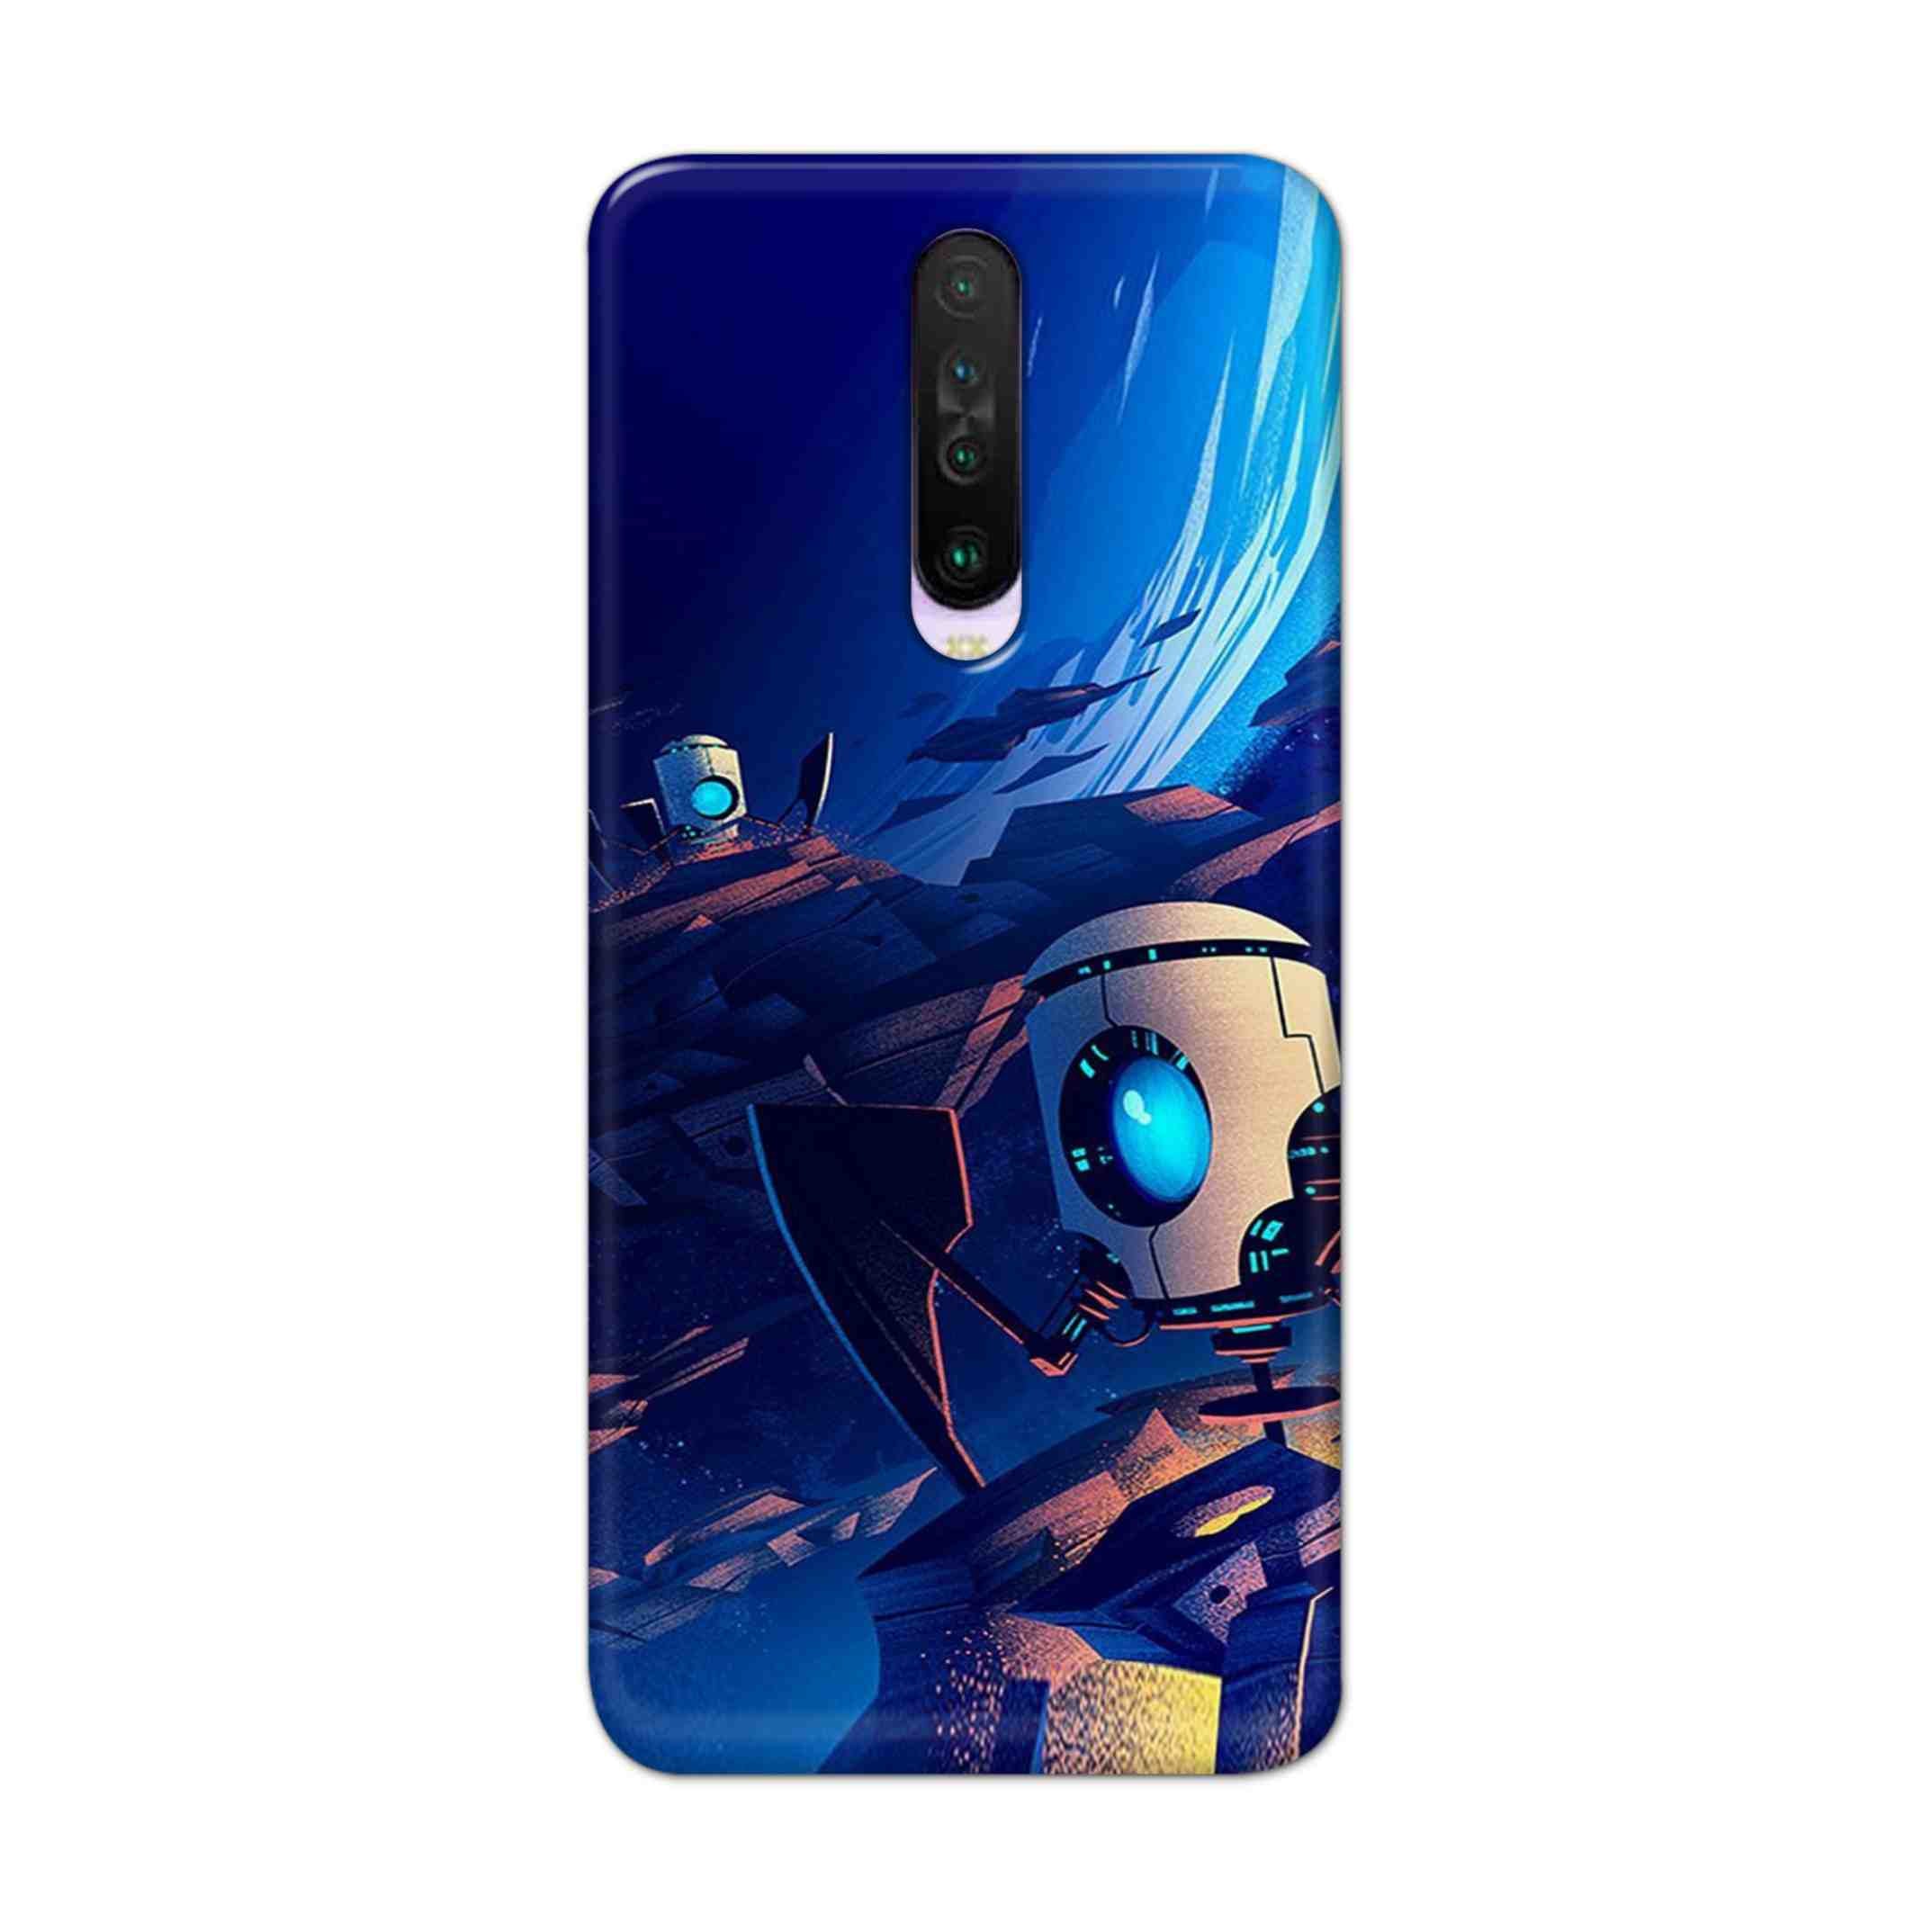 Buy Spaceship Robot Hard Back Mobile Phone Case Cover For Poco X2 Online